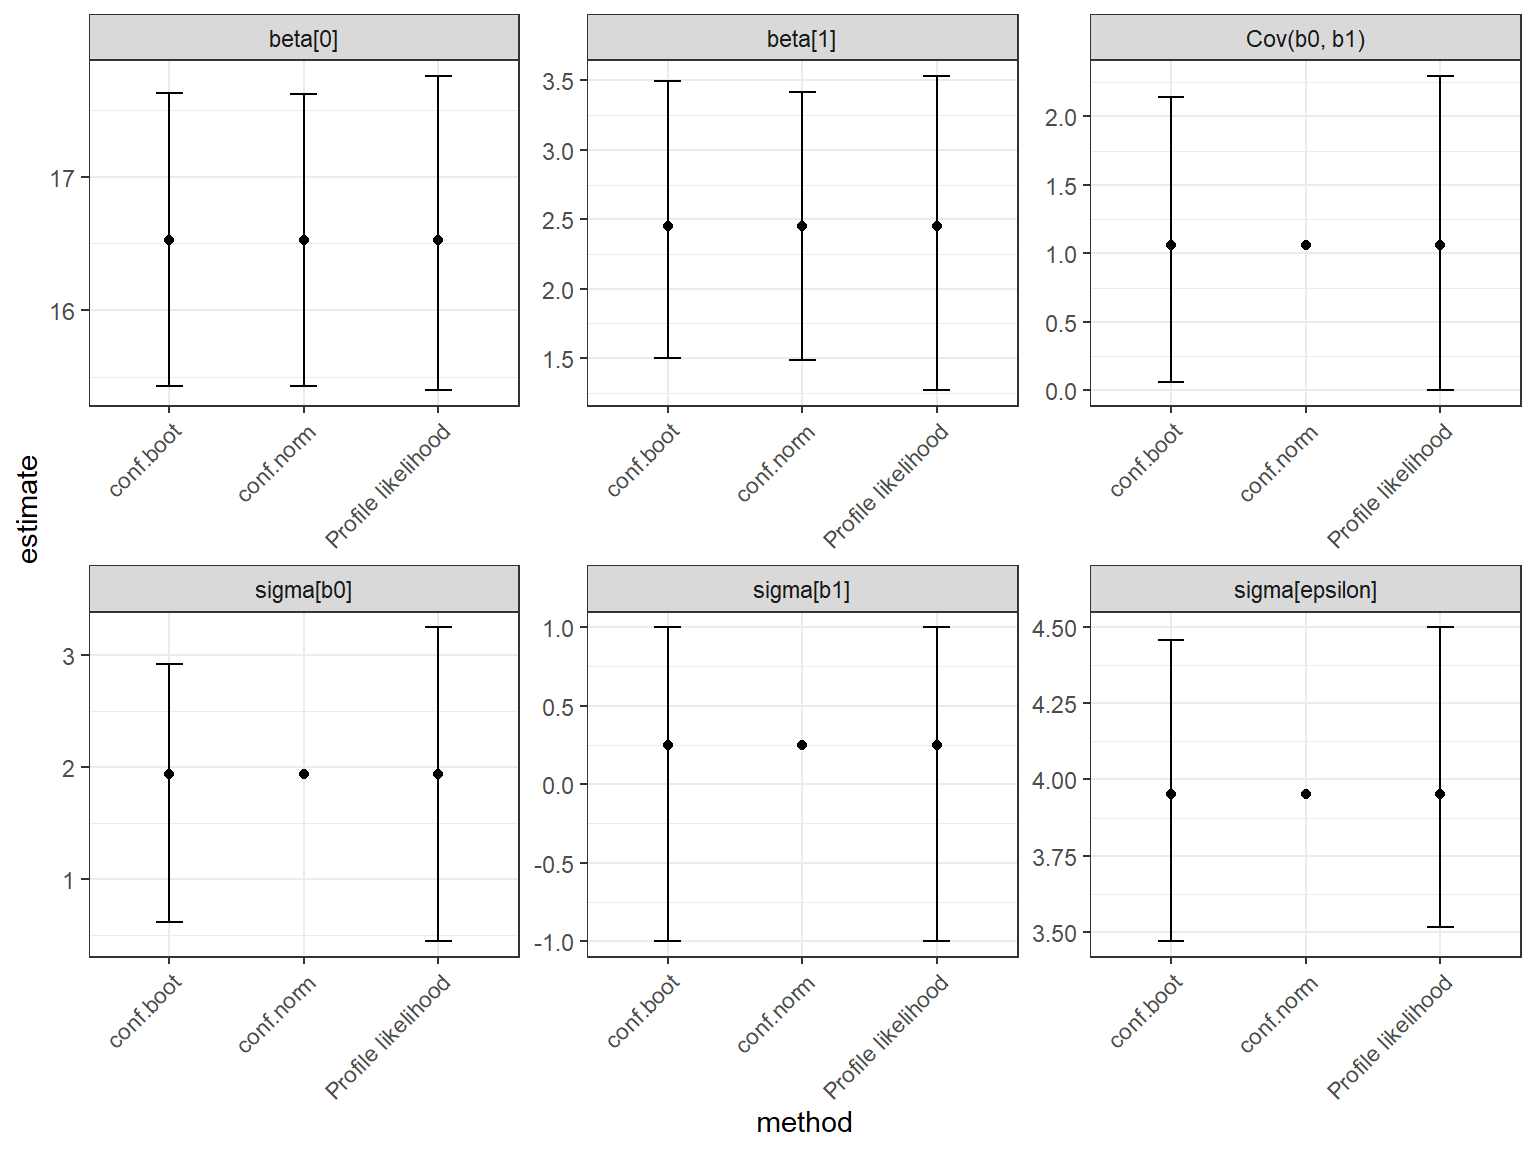 Comparison of different methods (profile likelihood, bootstrap, Wald) for computing confidence intervals for fixed-effects and variance parameters in mixed-effects models.